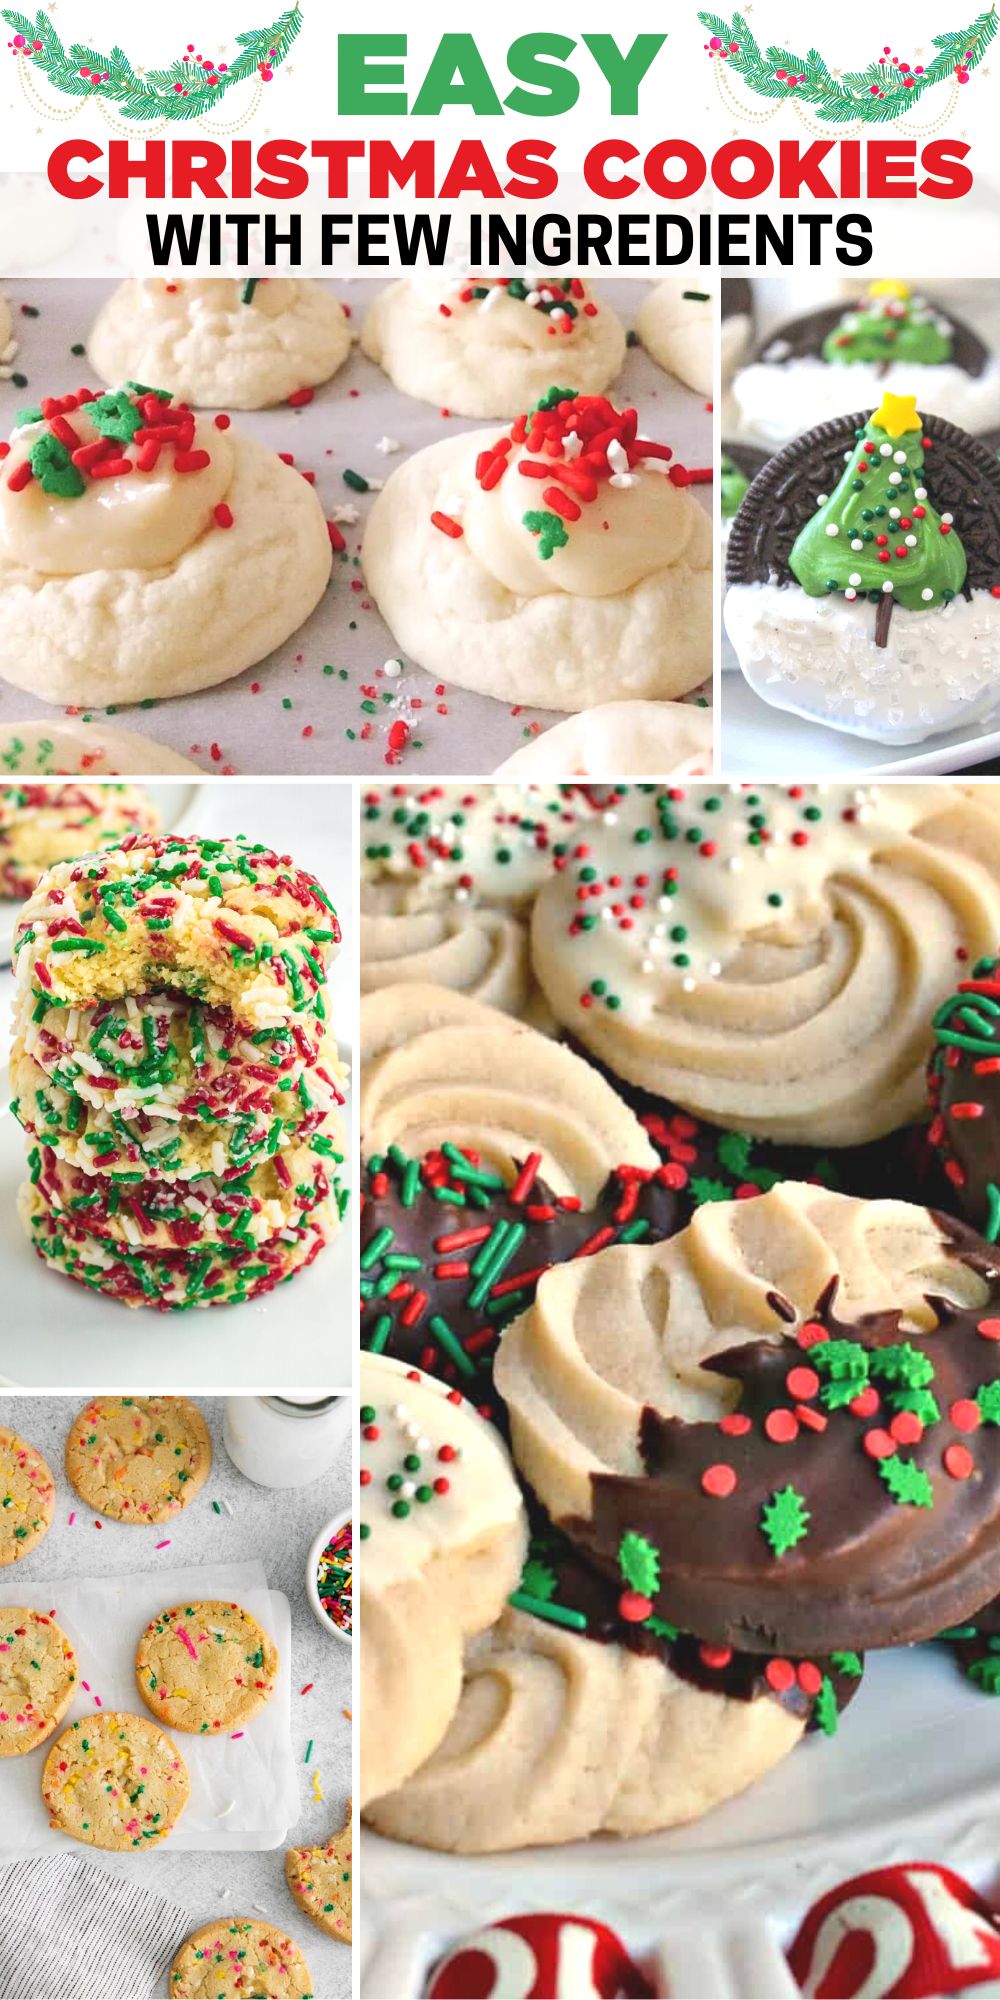 This collection of Easy Christmas Cookie Recipes with few ingredients is the perfect way to get you in the holiday spirit and out of the kitchen in a flash! From delicious sprinkle cookies to peanut butter blossoms and everything in between, these holiday cookie recipes are guaranteed to spread the Christmas cheer with everyone! 